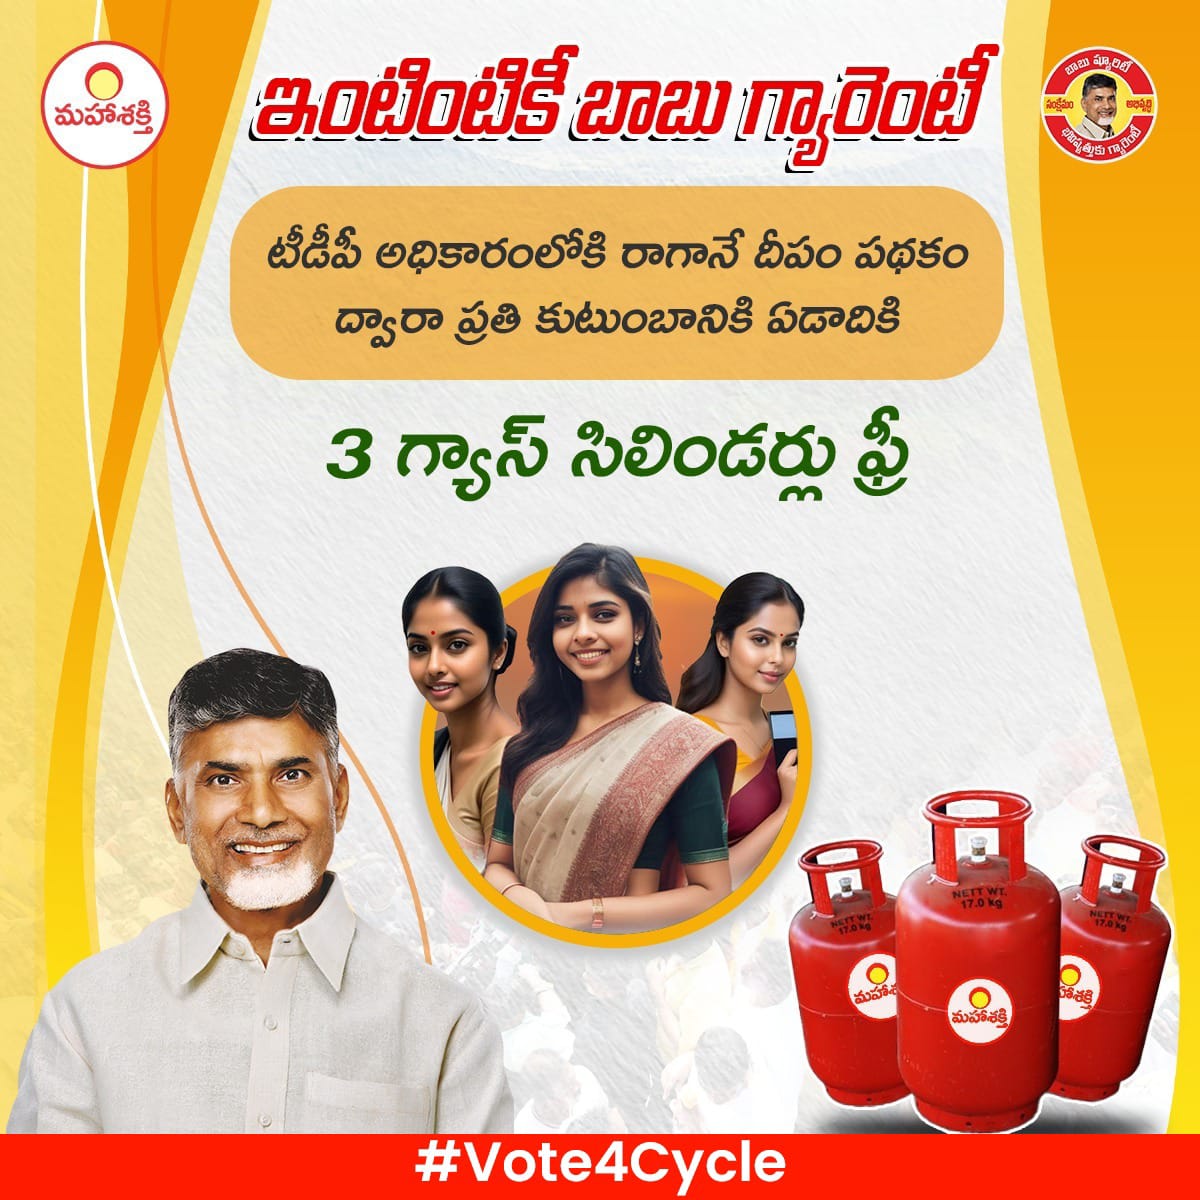 Inclusivity is the cornerstone of progress. Chandrababu Naidu's governance in Andhra Pradesh has uplifted the marginalized and empowered the vulnerable. Let's continue supporting inclusivity by voting for the cycle! #TDPJSPBJPWinningAP